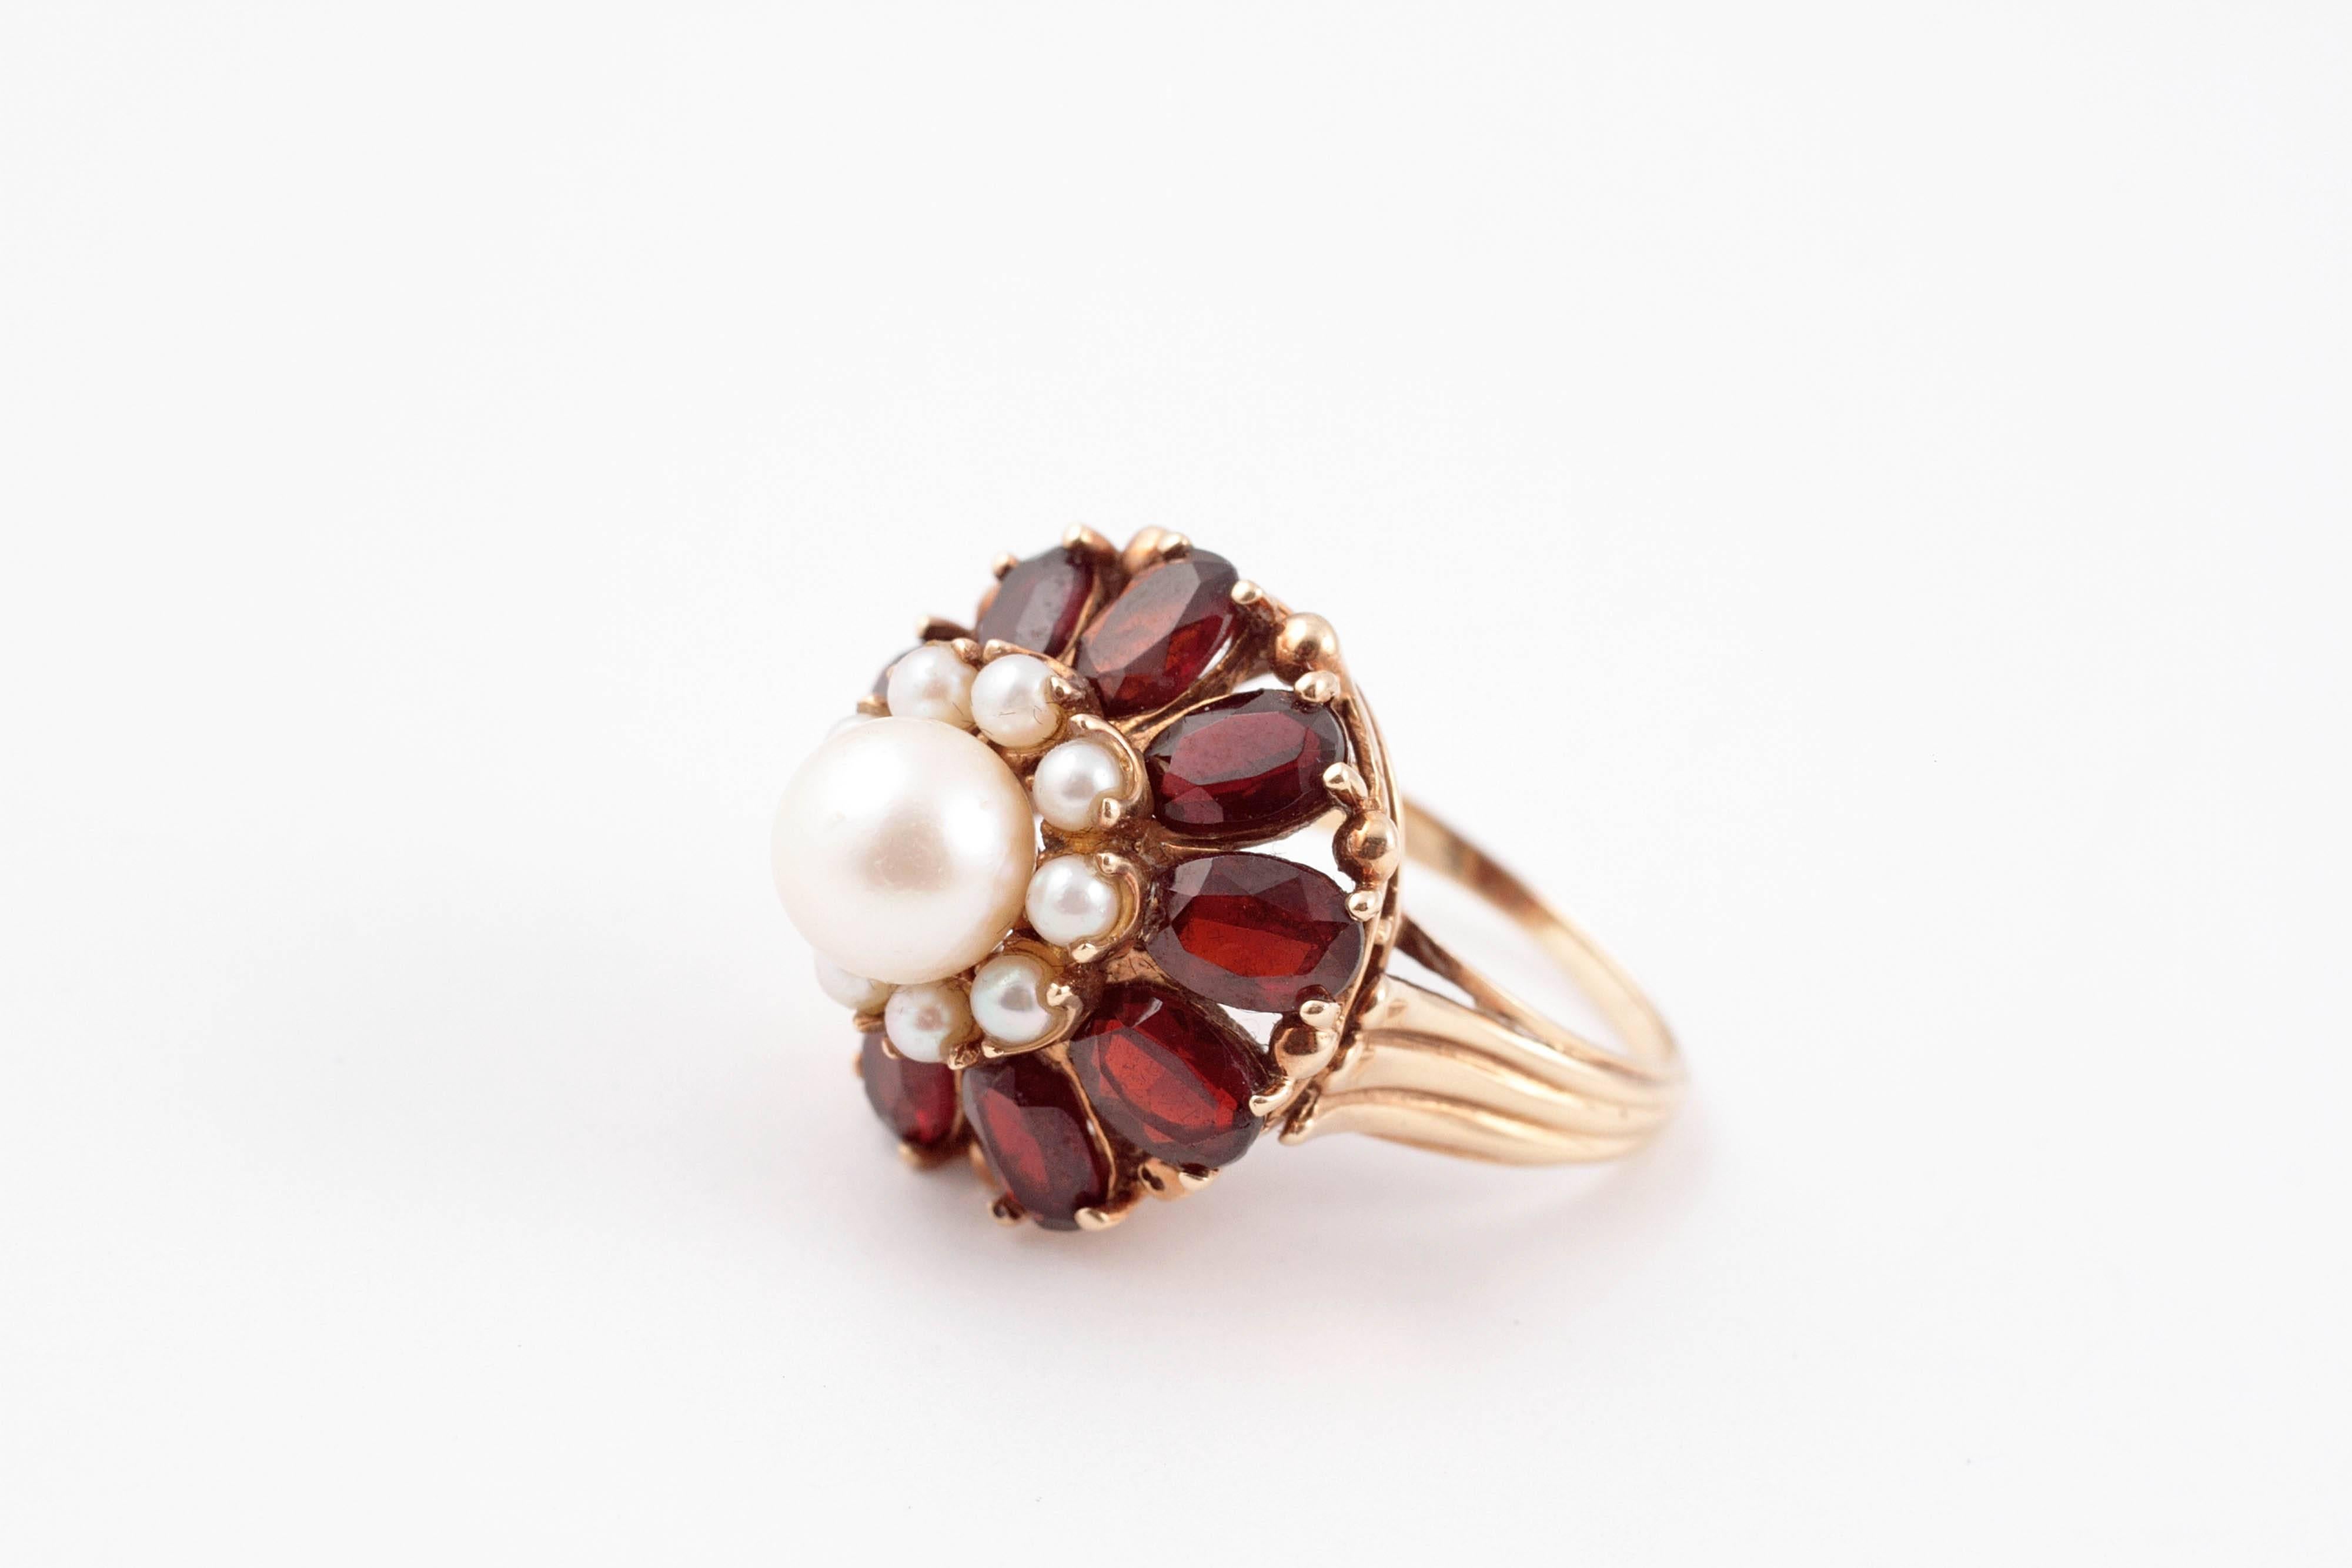 Cultured pearls surrounded by garnets in a delightful flower flower ring style.  The large pearl measures 7.25 mm and all are set in 14 Karat yellow gold.  Size 7 1/4.